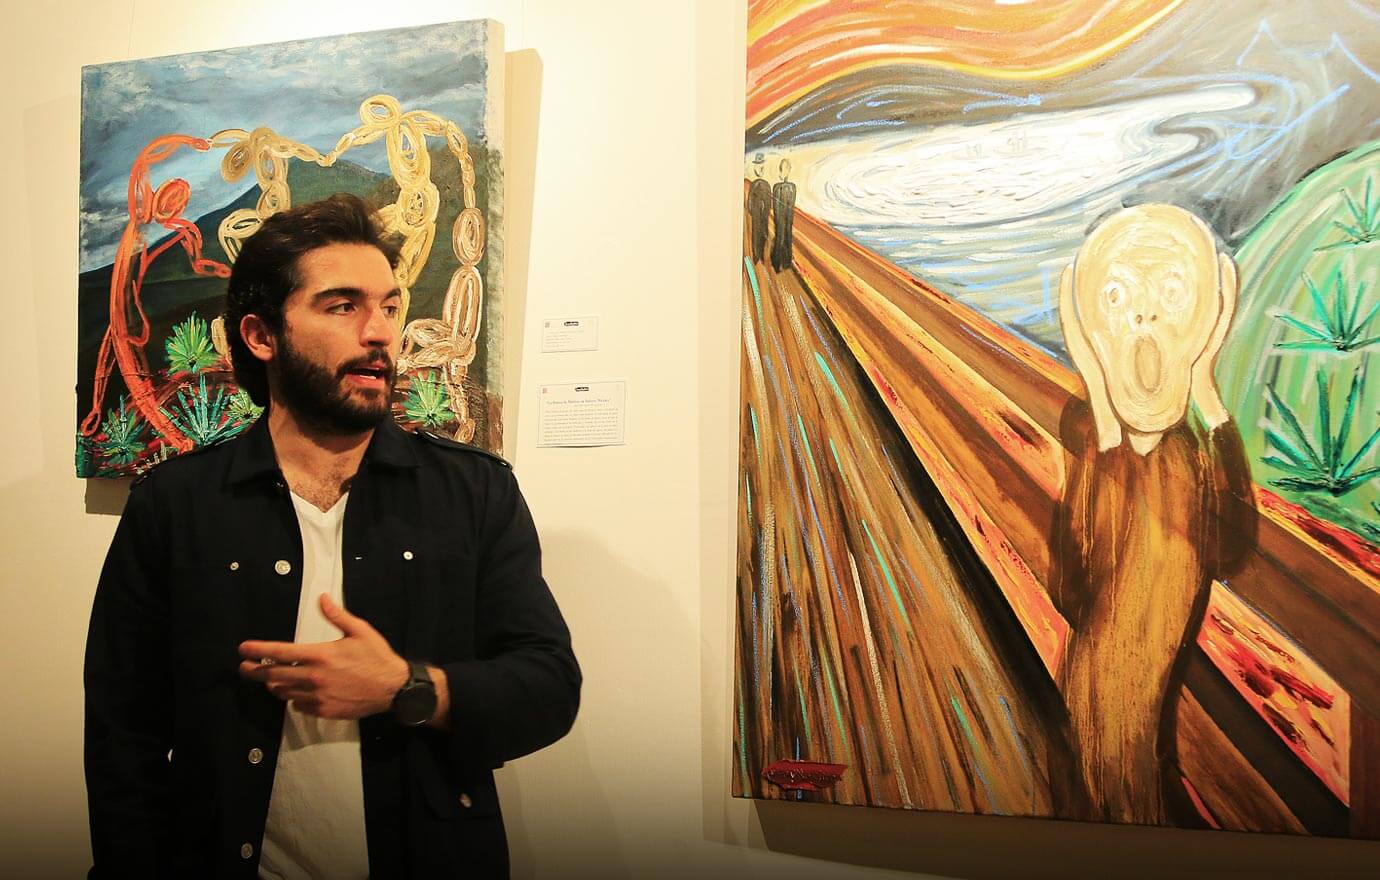 The students of the Universidad Panamericana were present at the exhibition &quot;My Mexico&quot; by the artist Simón Quintero.